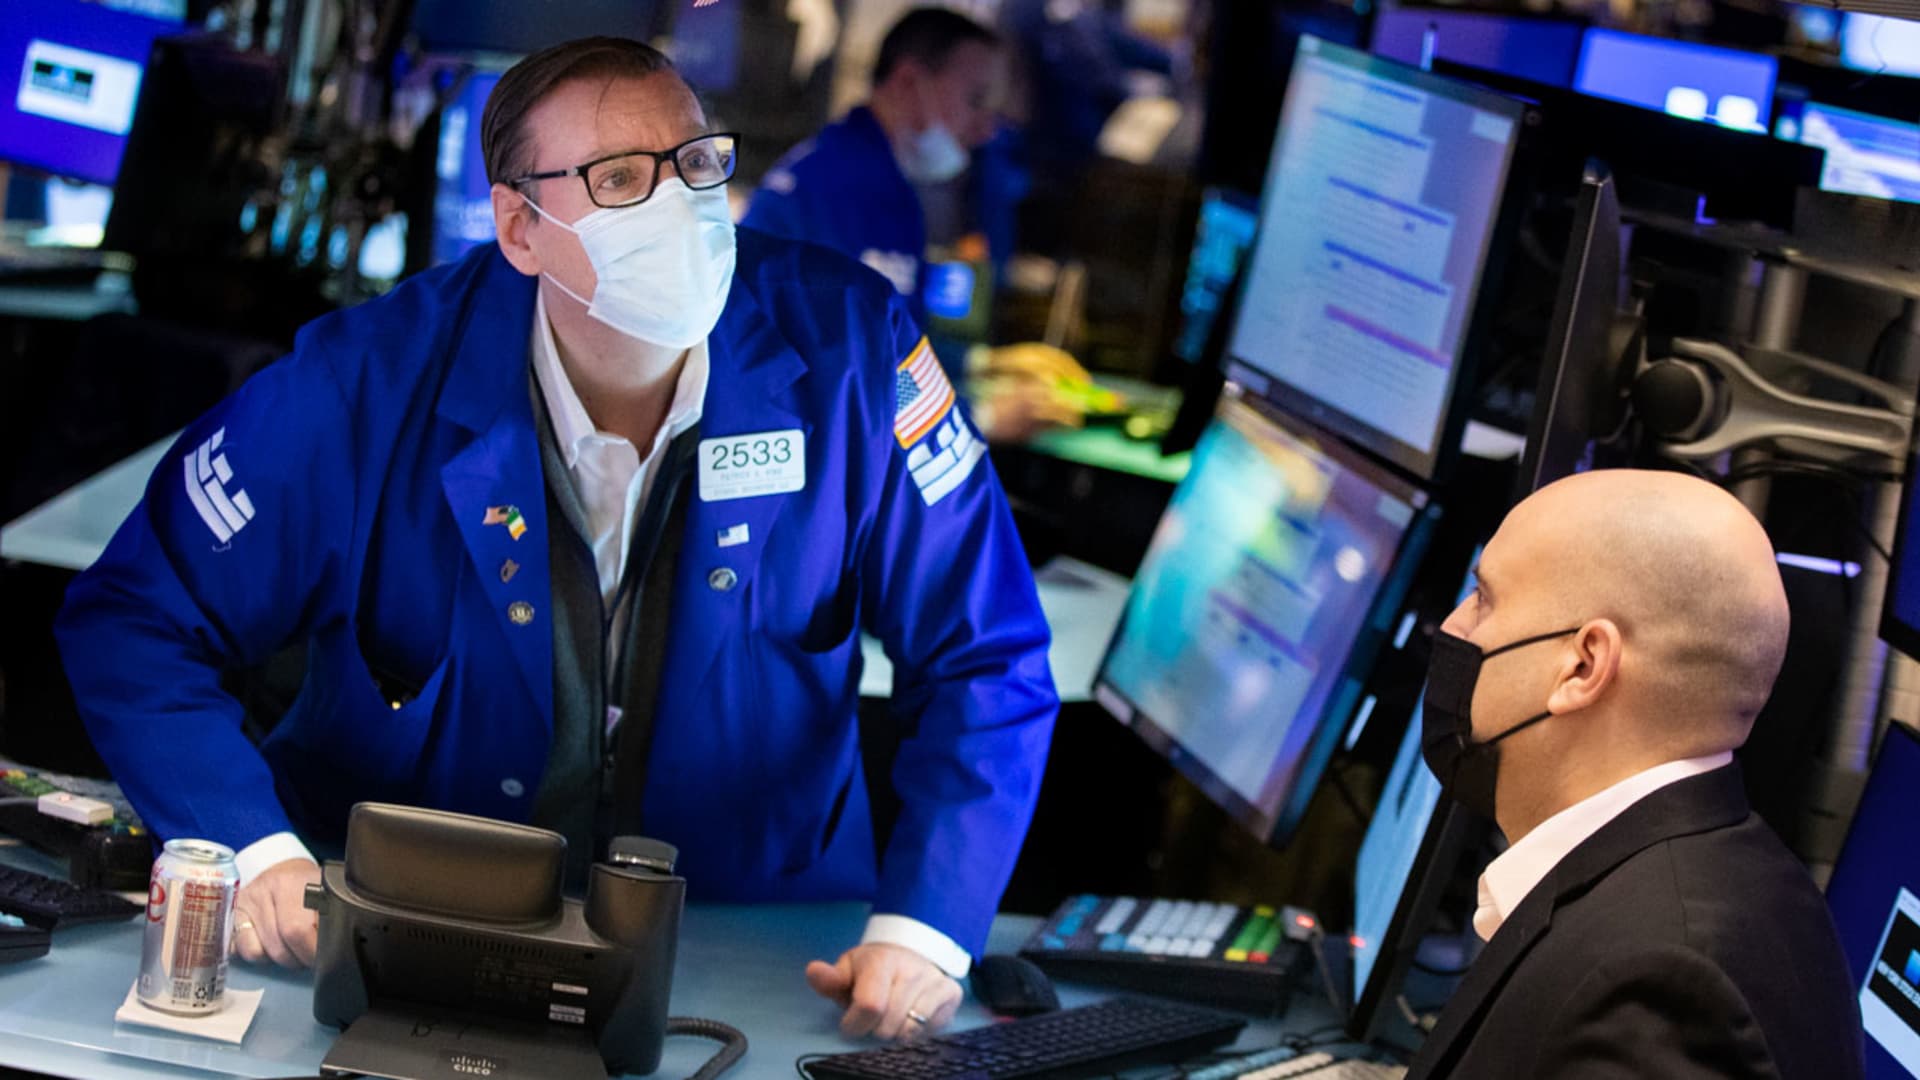 Traders on the floor of the NYSE, Feb. 8, 2022.